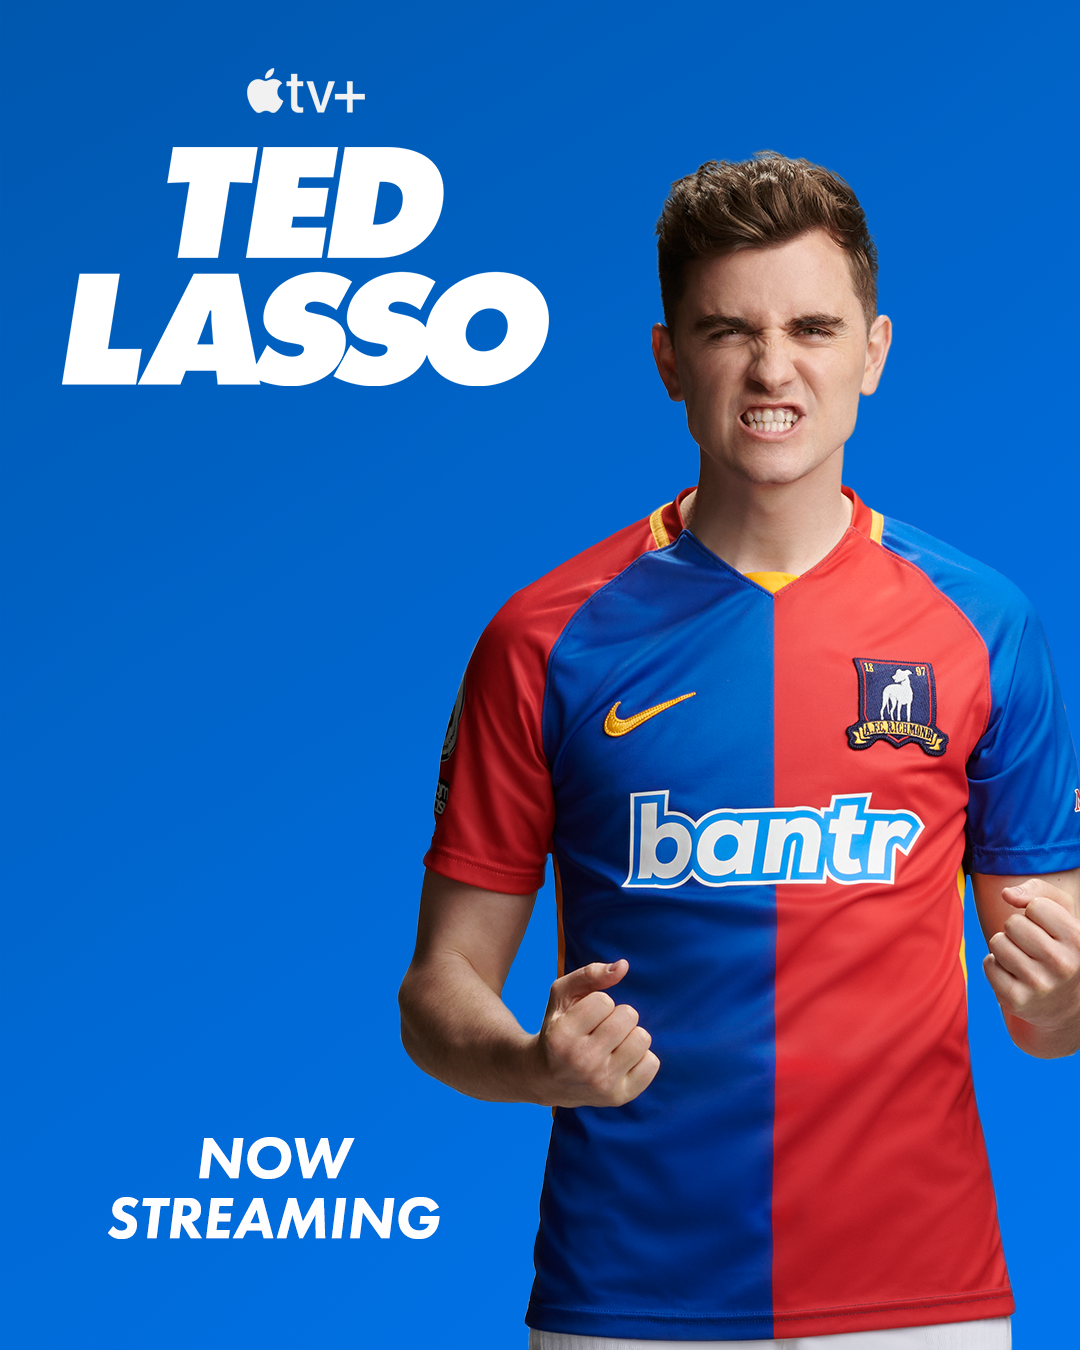 Is 'Ted Lasso' Footballer Zava Based on a Real Person?